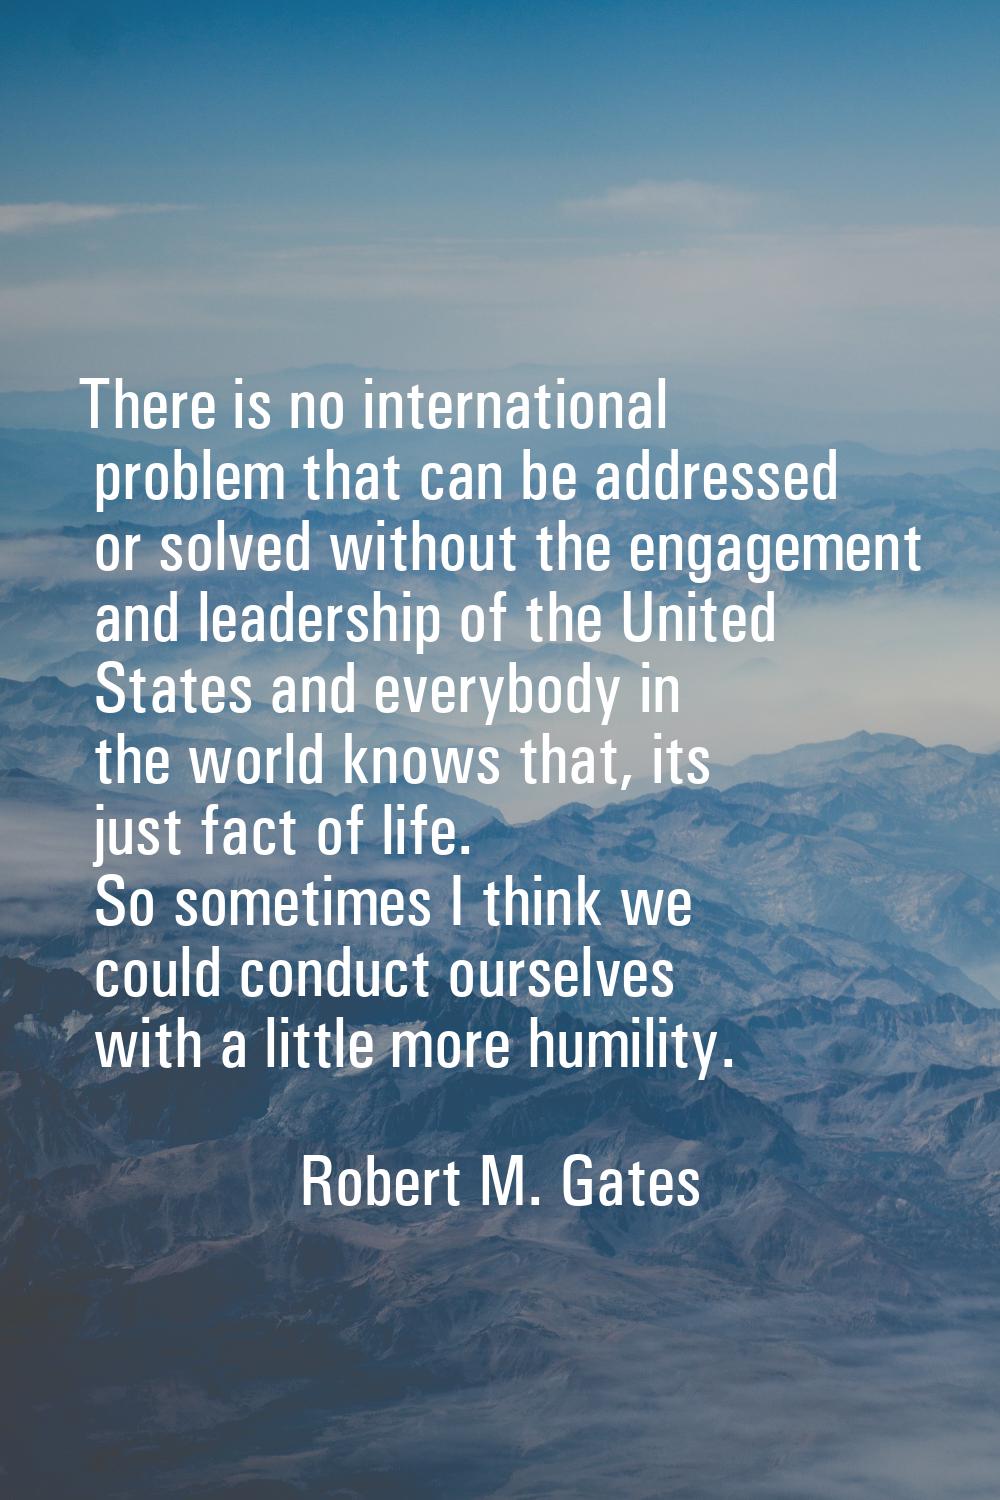 There is no international problem that can be addressed or solved without the engagement and leader